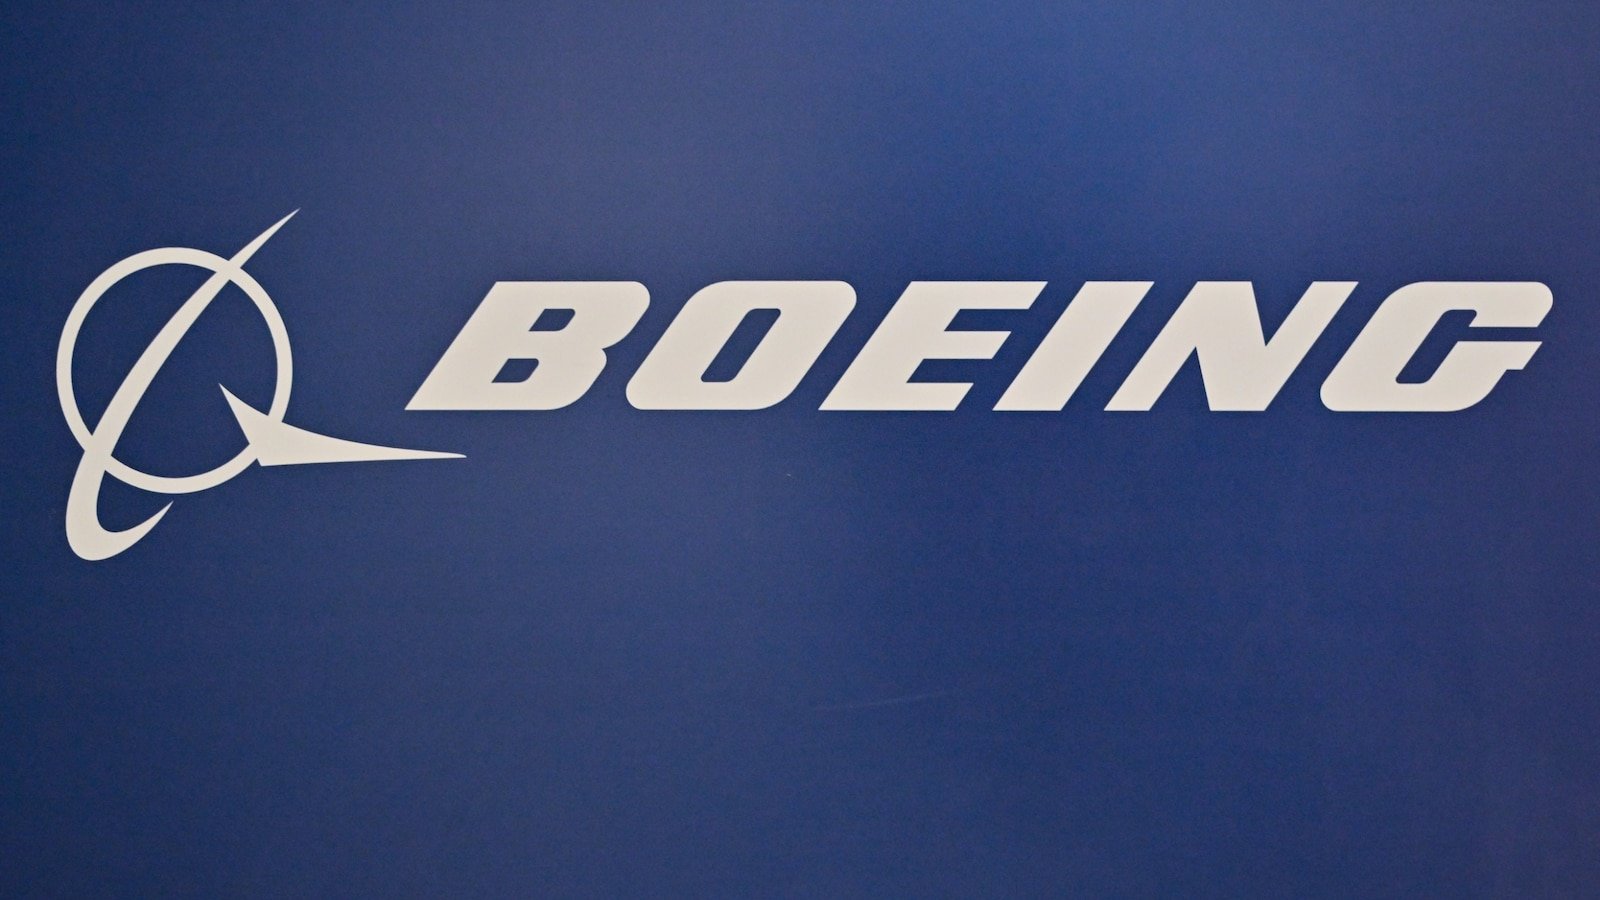 Boeing agrees in principle to deal with DOJ to plead guilty to misleading FAA